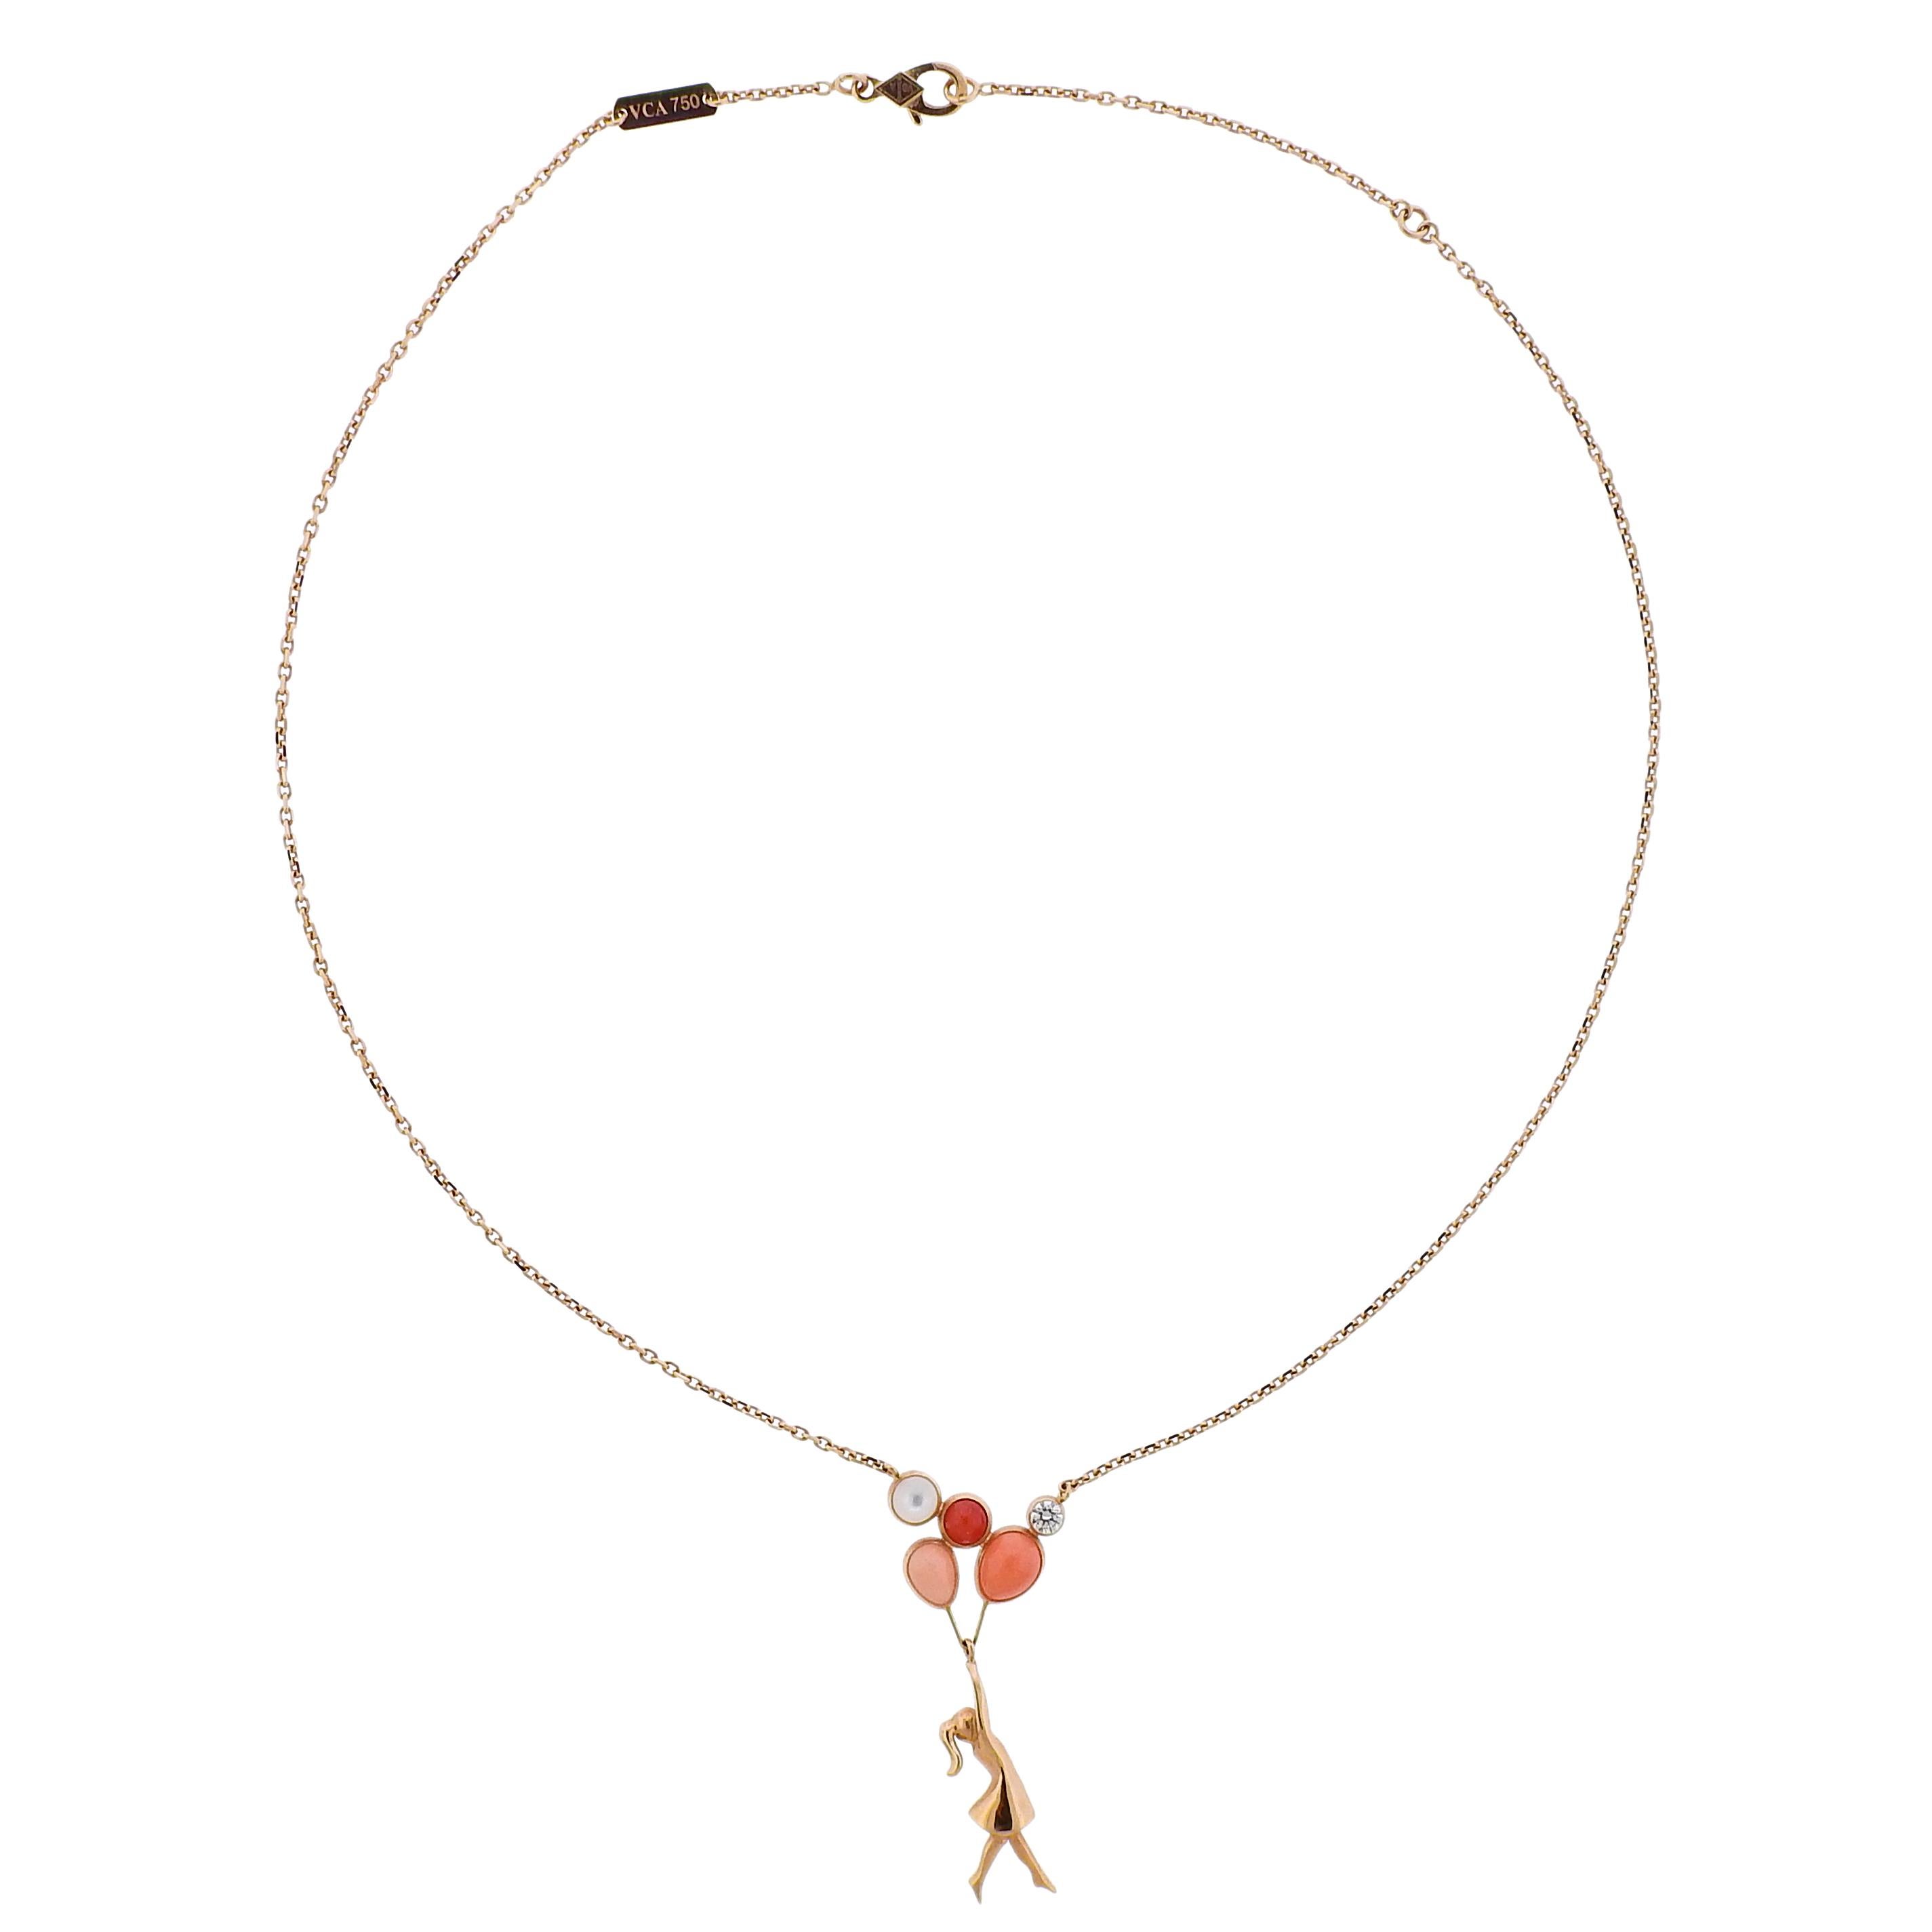 Rare 18k rose gold pendant necklace, crafted by Van Cleef & Arpels for a special edition Mercredi a Paris collection, featuring multi-shade coral, mother of pearl and an 0.11ct FG/VVS diamond. Comes with VCA pouch, COA and VCA folder with additional